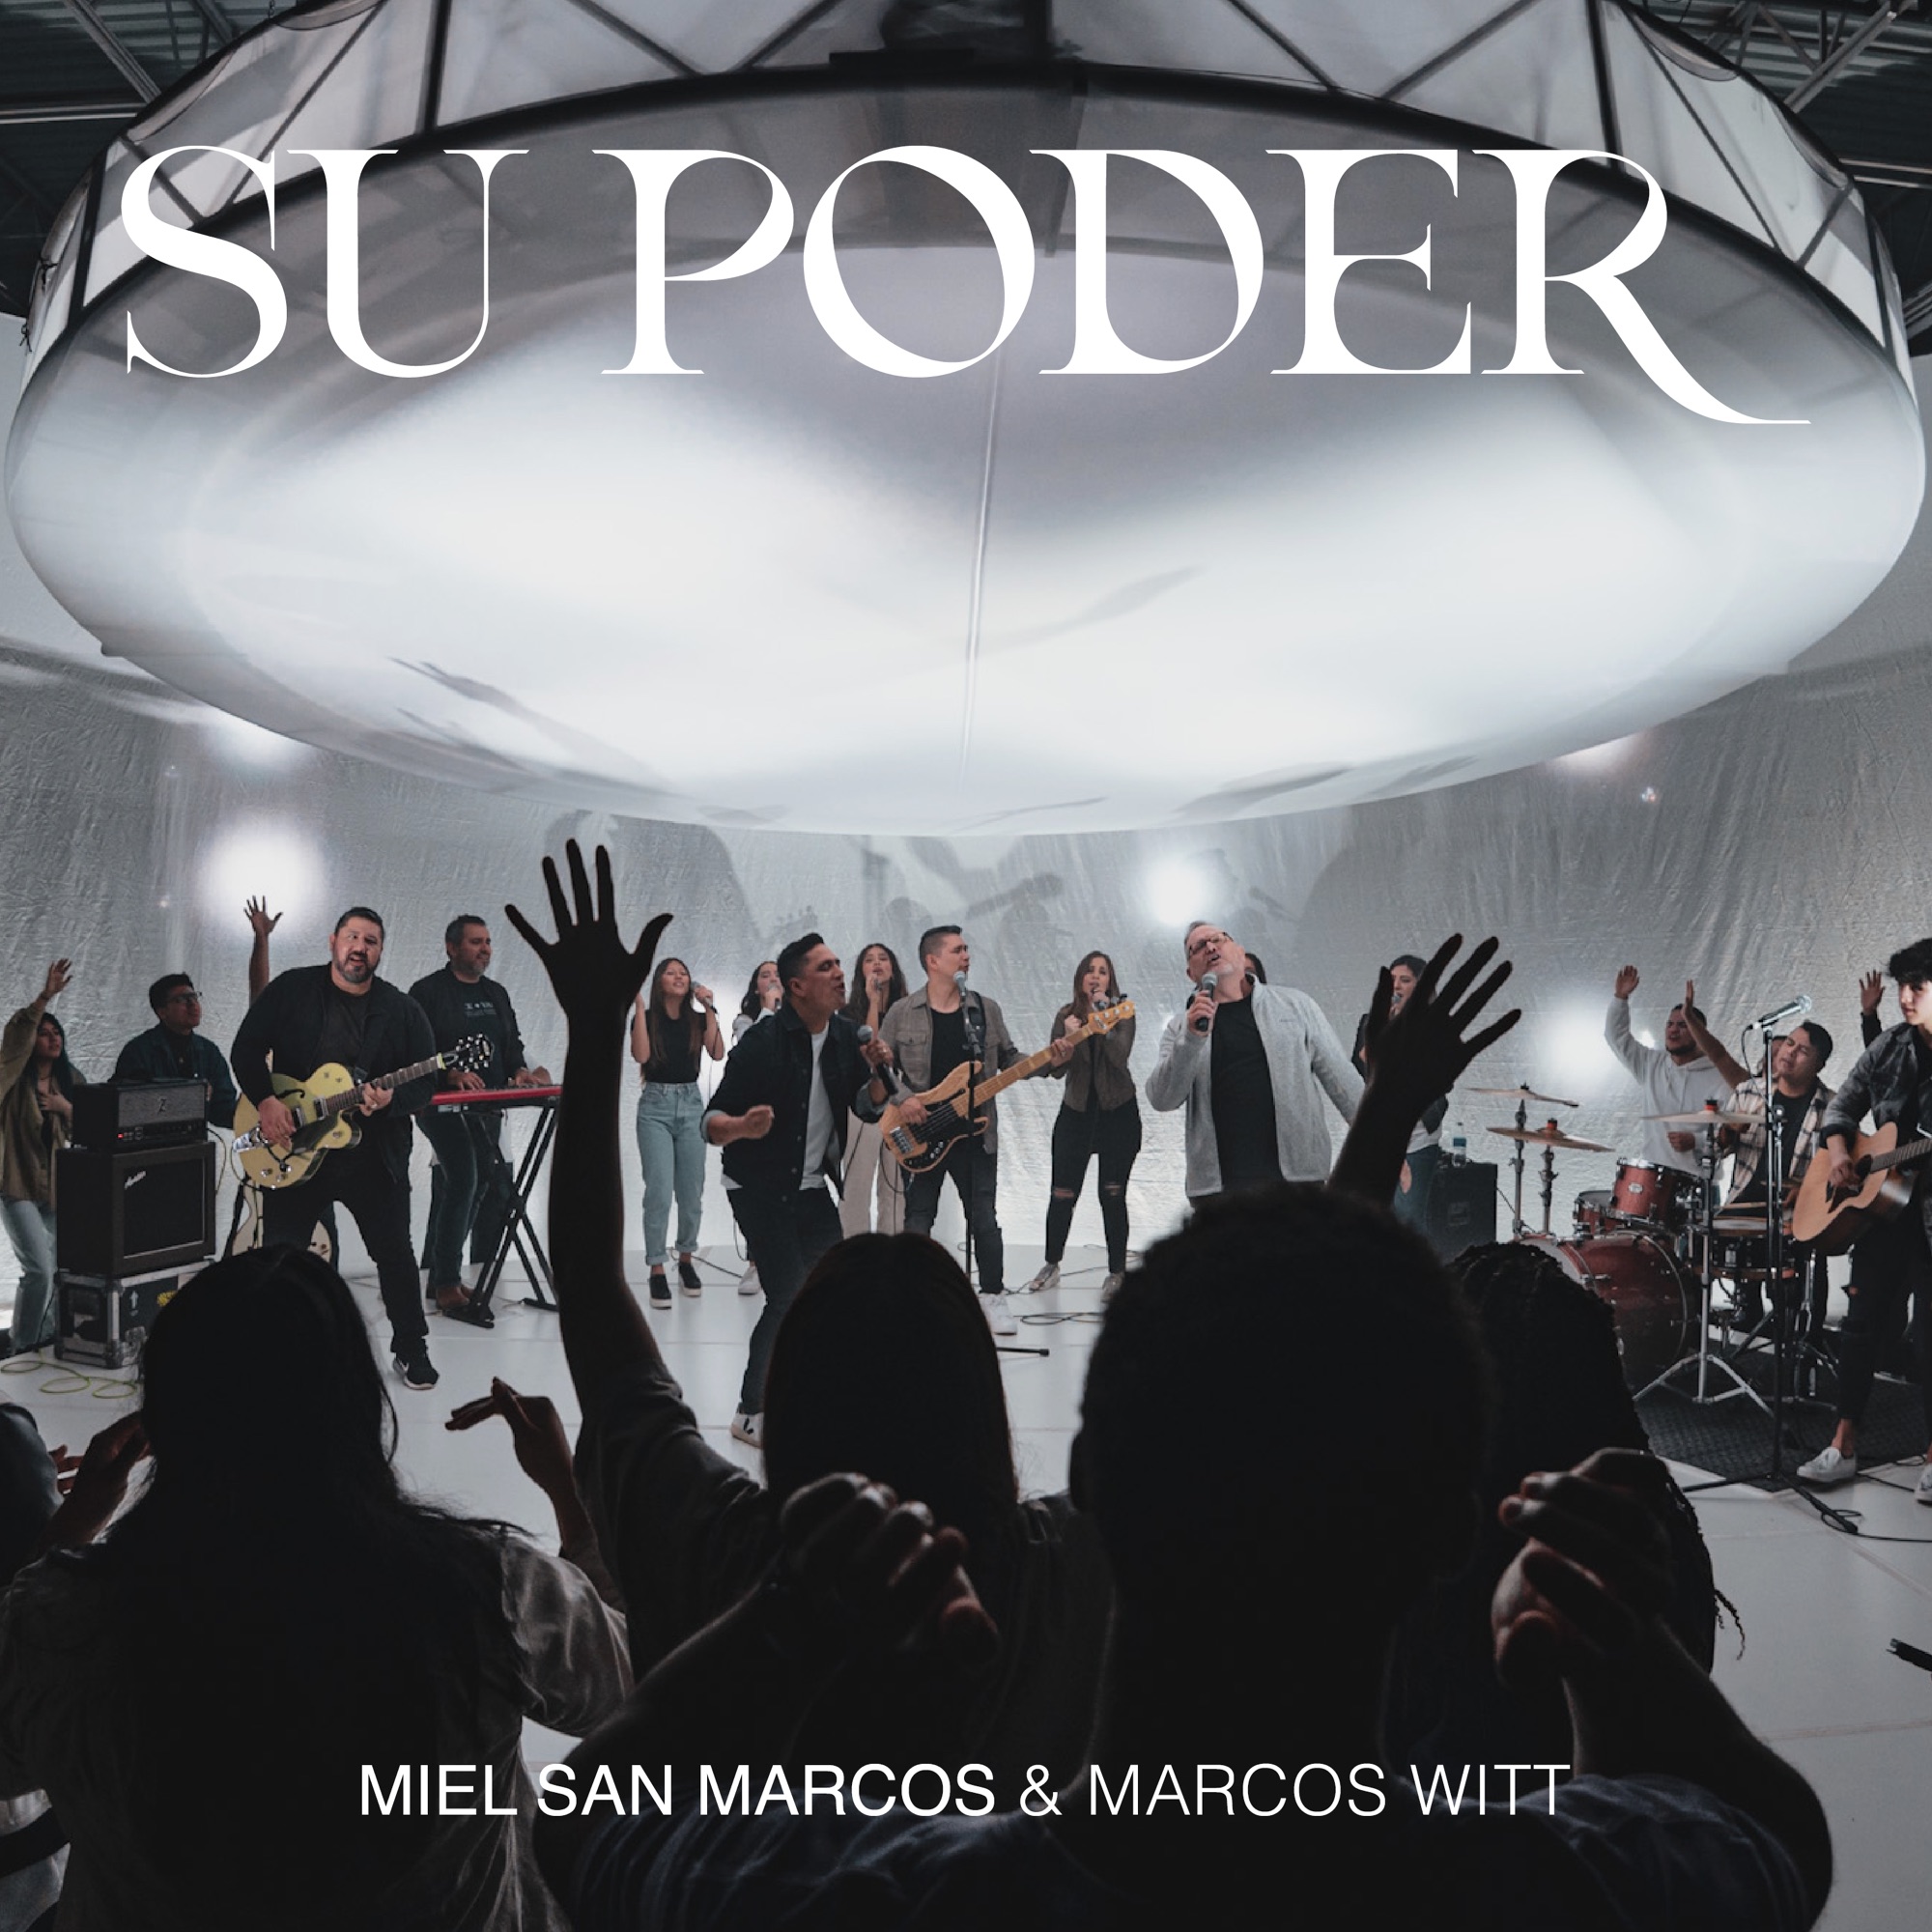 Art for Su Poder by Miel San Marcos & Marcos Witt